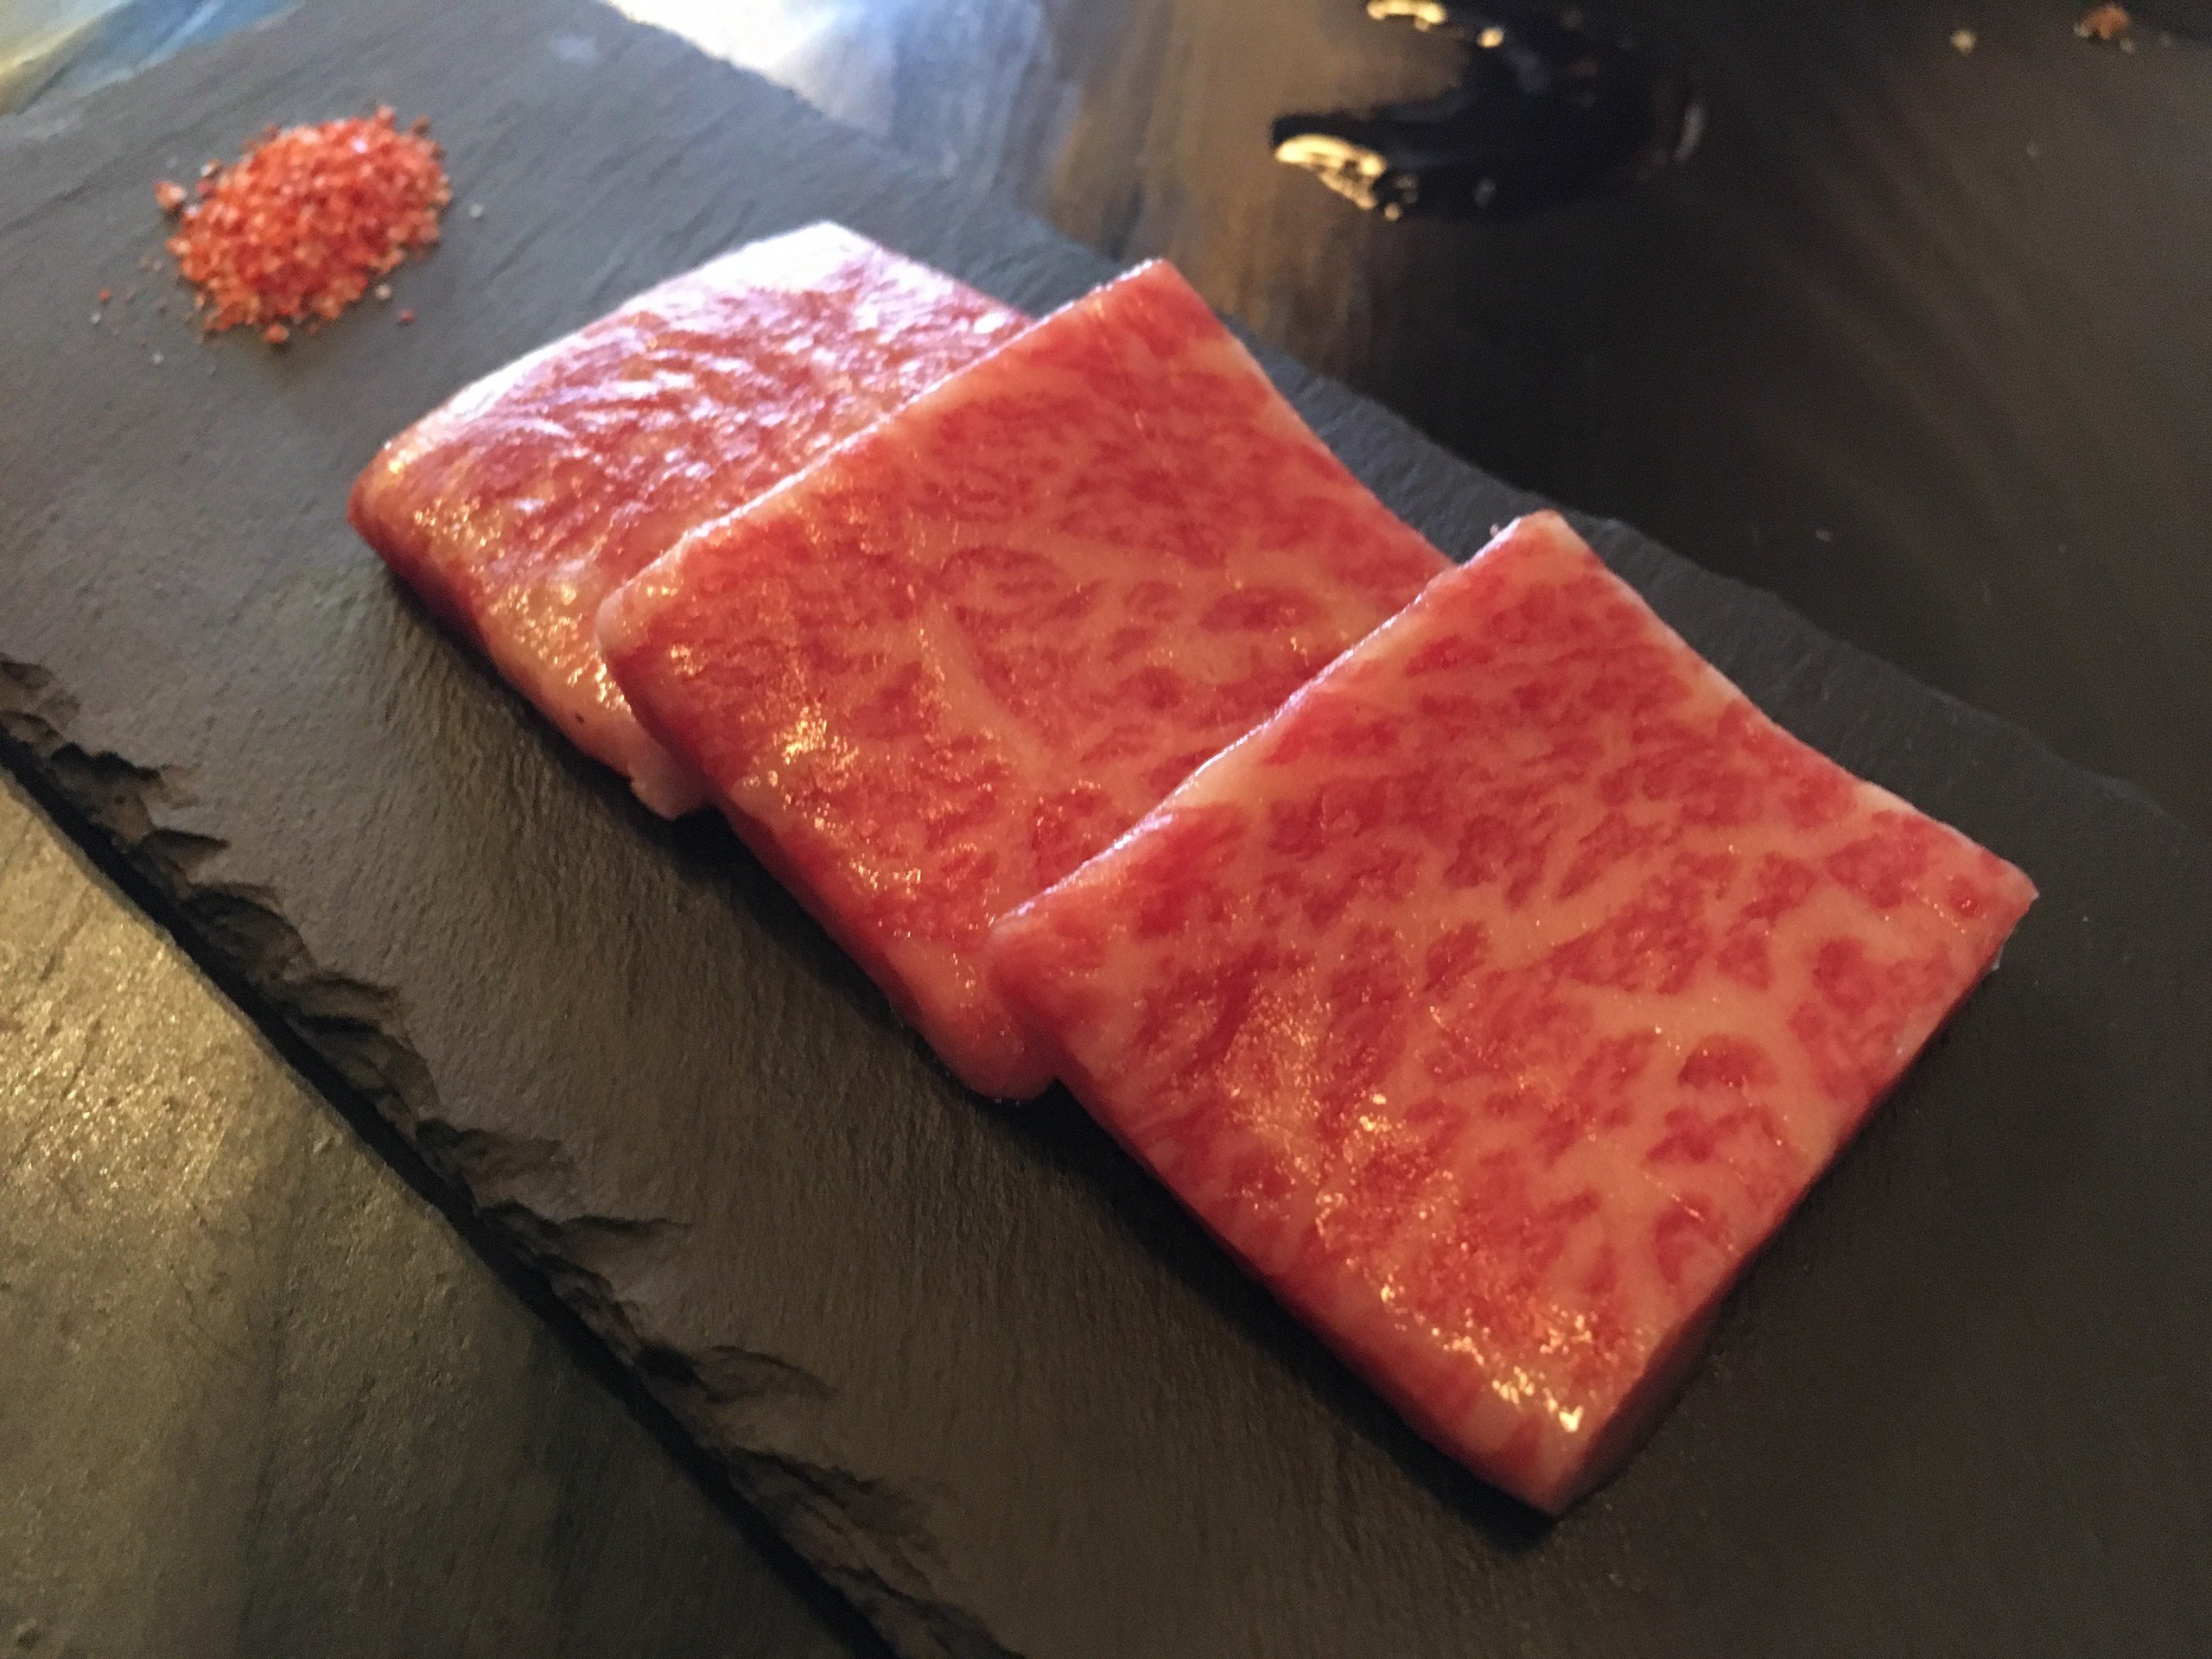 I've never had premium A5 Wagyu beef before so I couldn't resist ordering this despite its hefty price. But after I tried this tenderest of beef, I was so glad we splurged. Comes with a hot stone to grill. ($29.99 for 2 oz.)